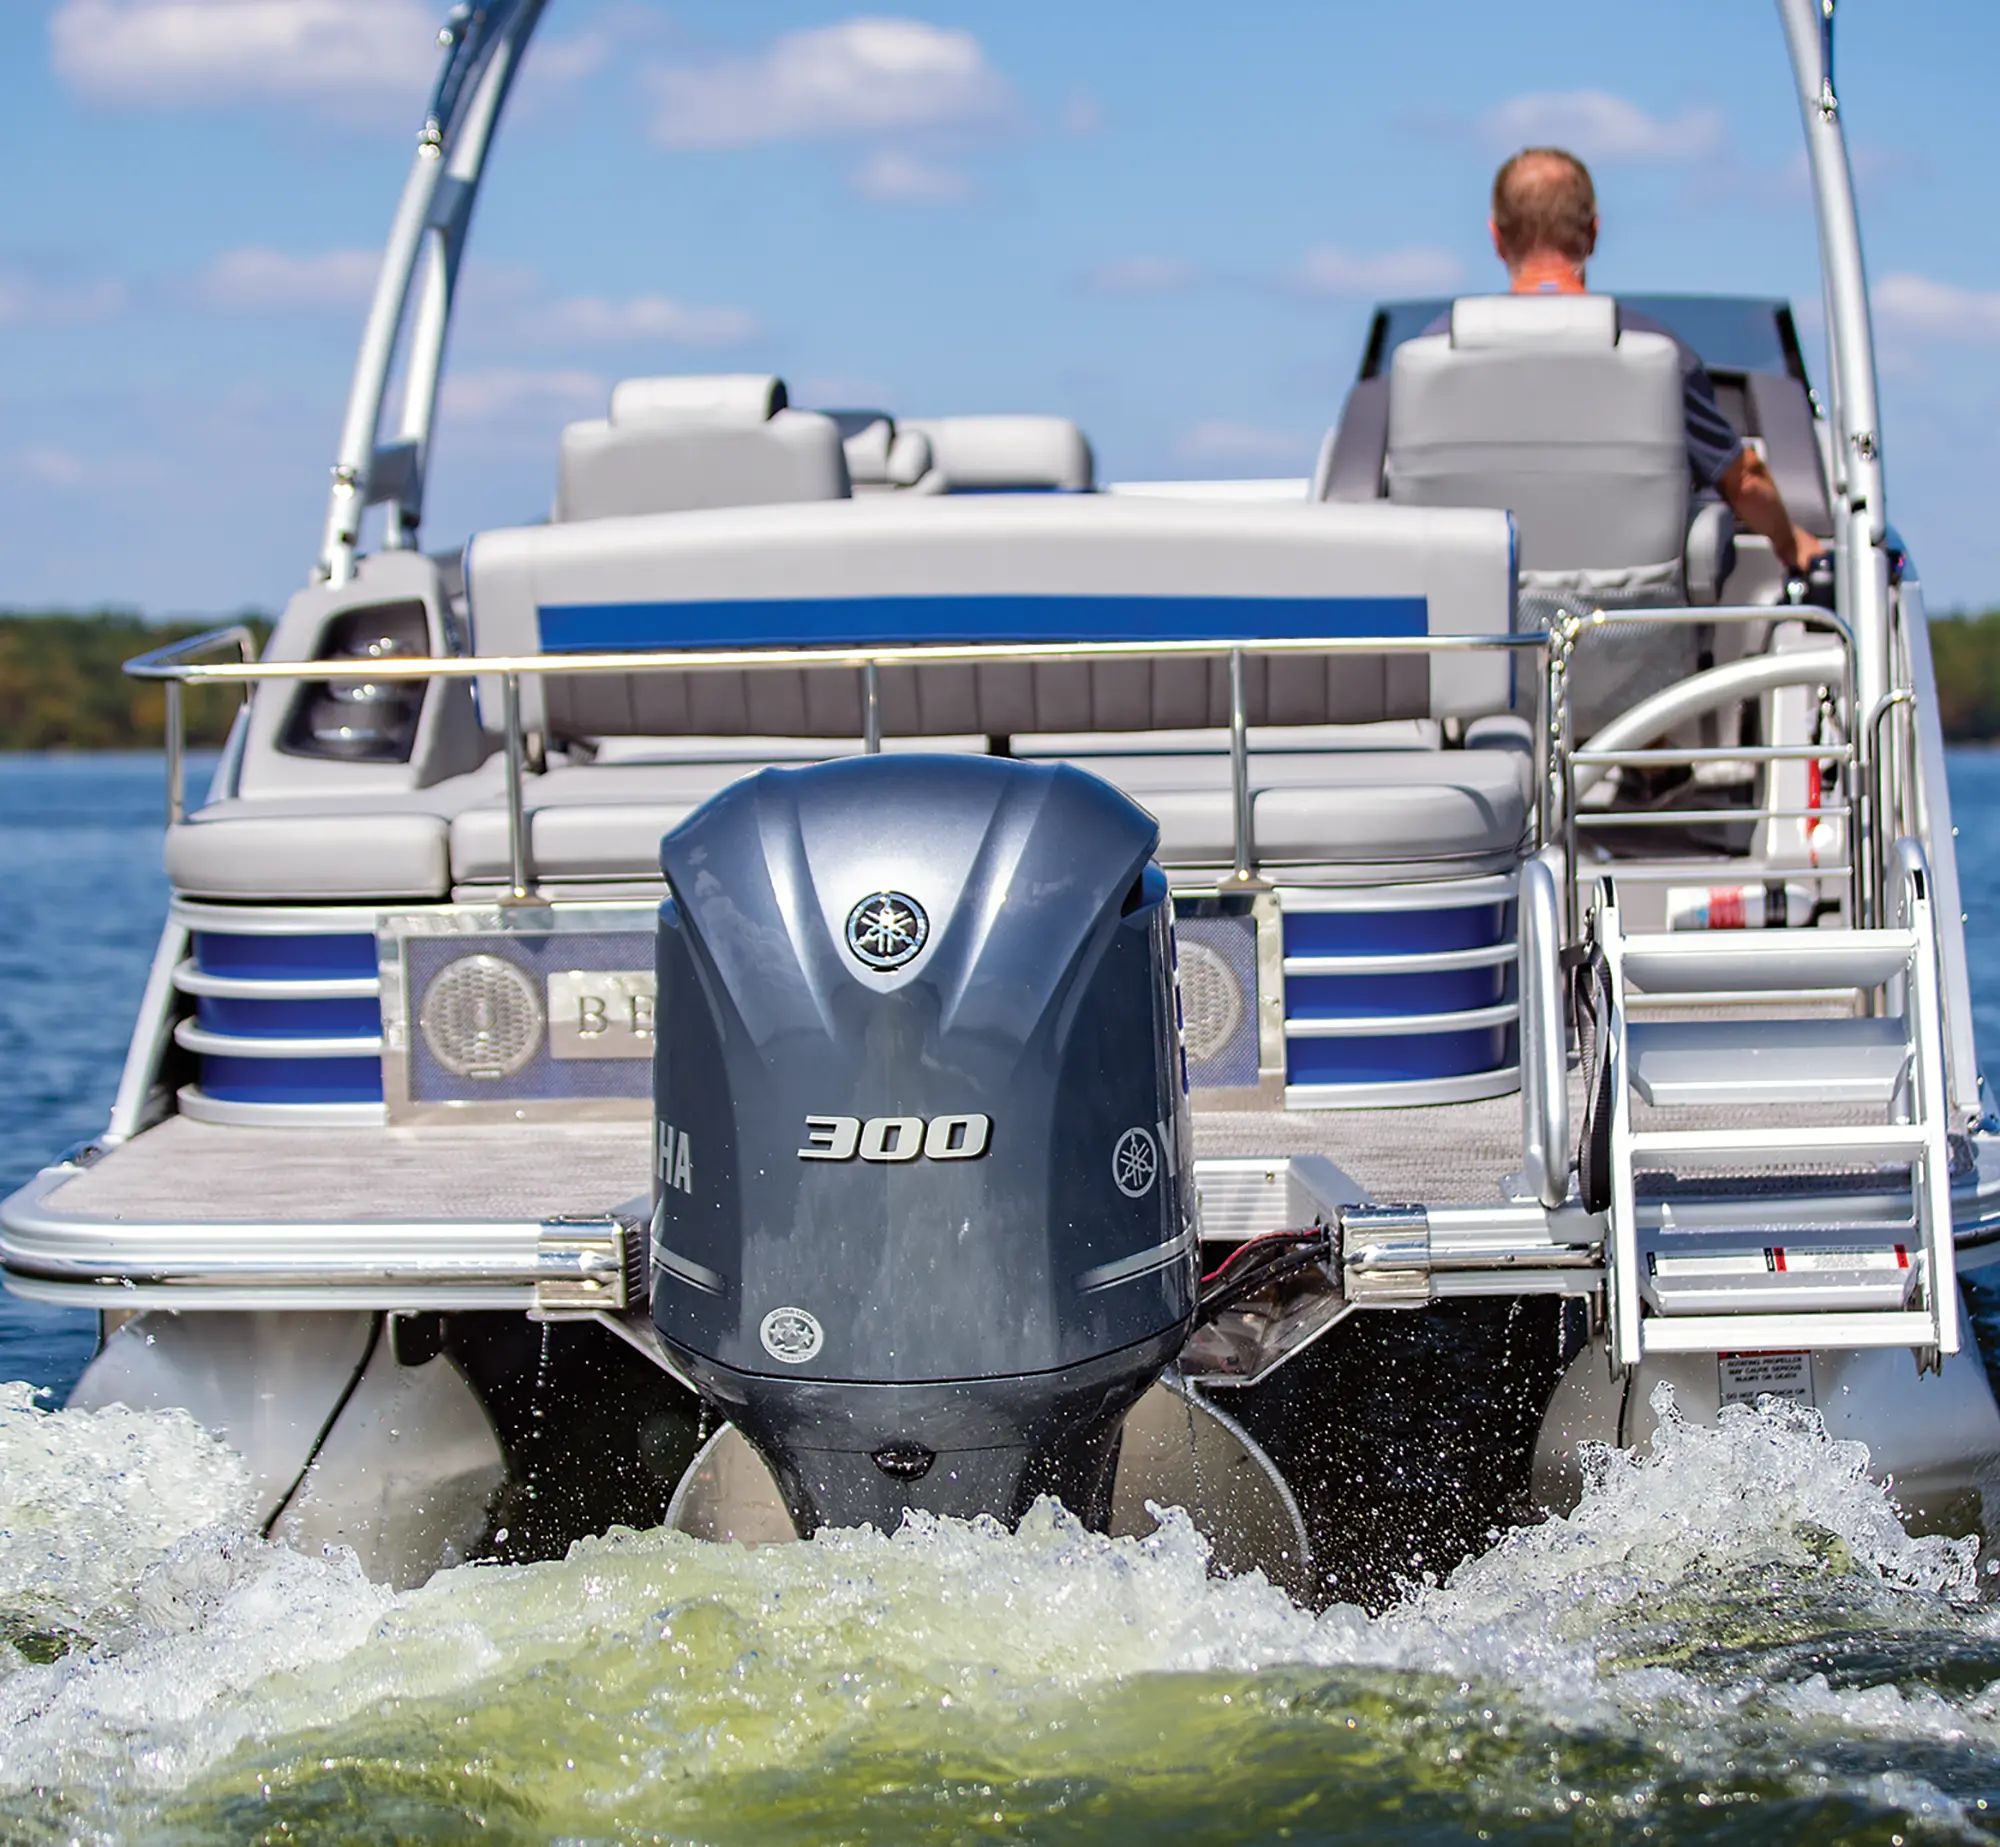 Close-up aerial rear view of the the Yamaha 300 Four Stroke outboard motor engine from the Bennington Sport 24 LXSSBA pontoon motorboat vehicle as a man is seen driving away out in the water during the day